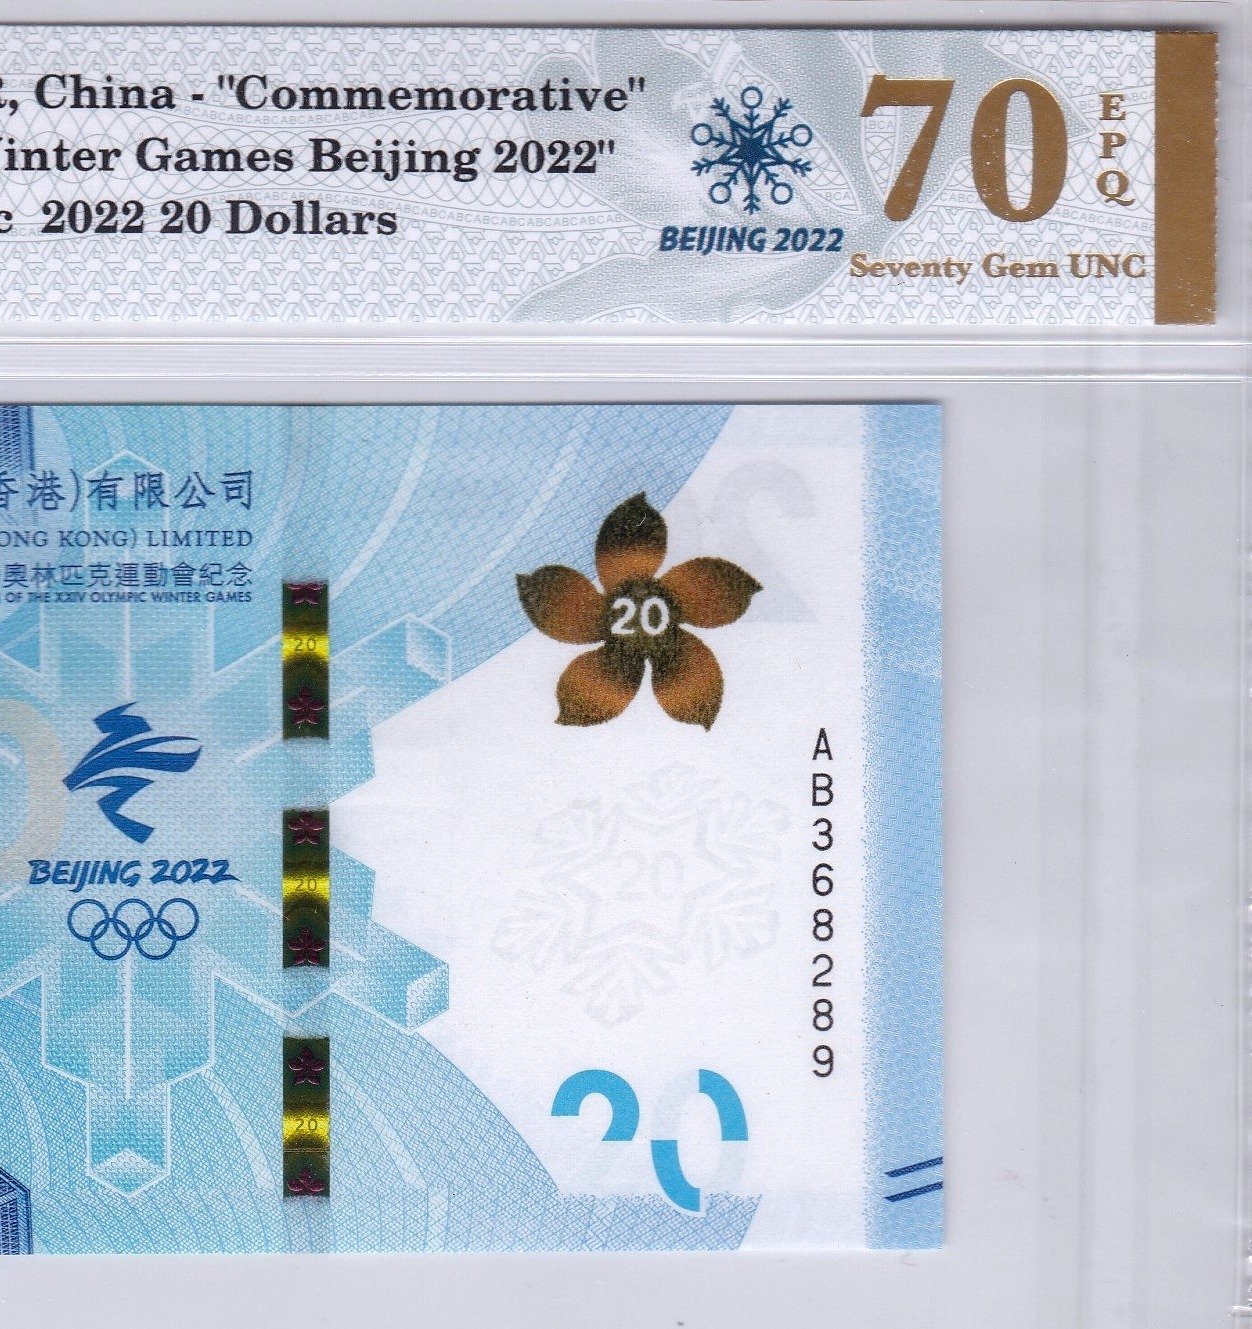 The first 70 EPQ banknote graded by ABC Certification